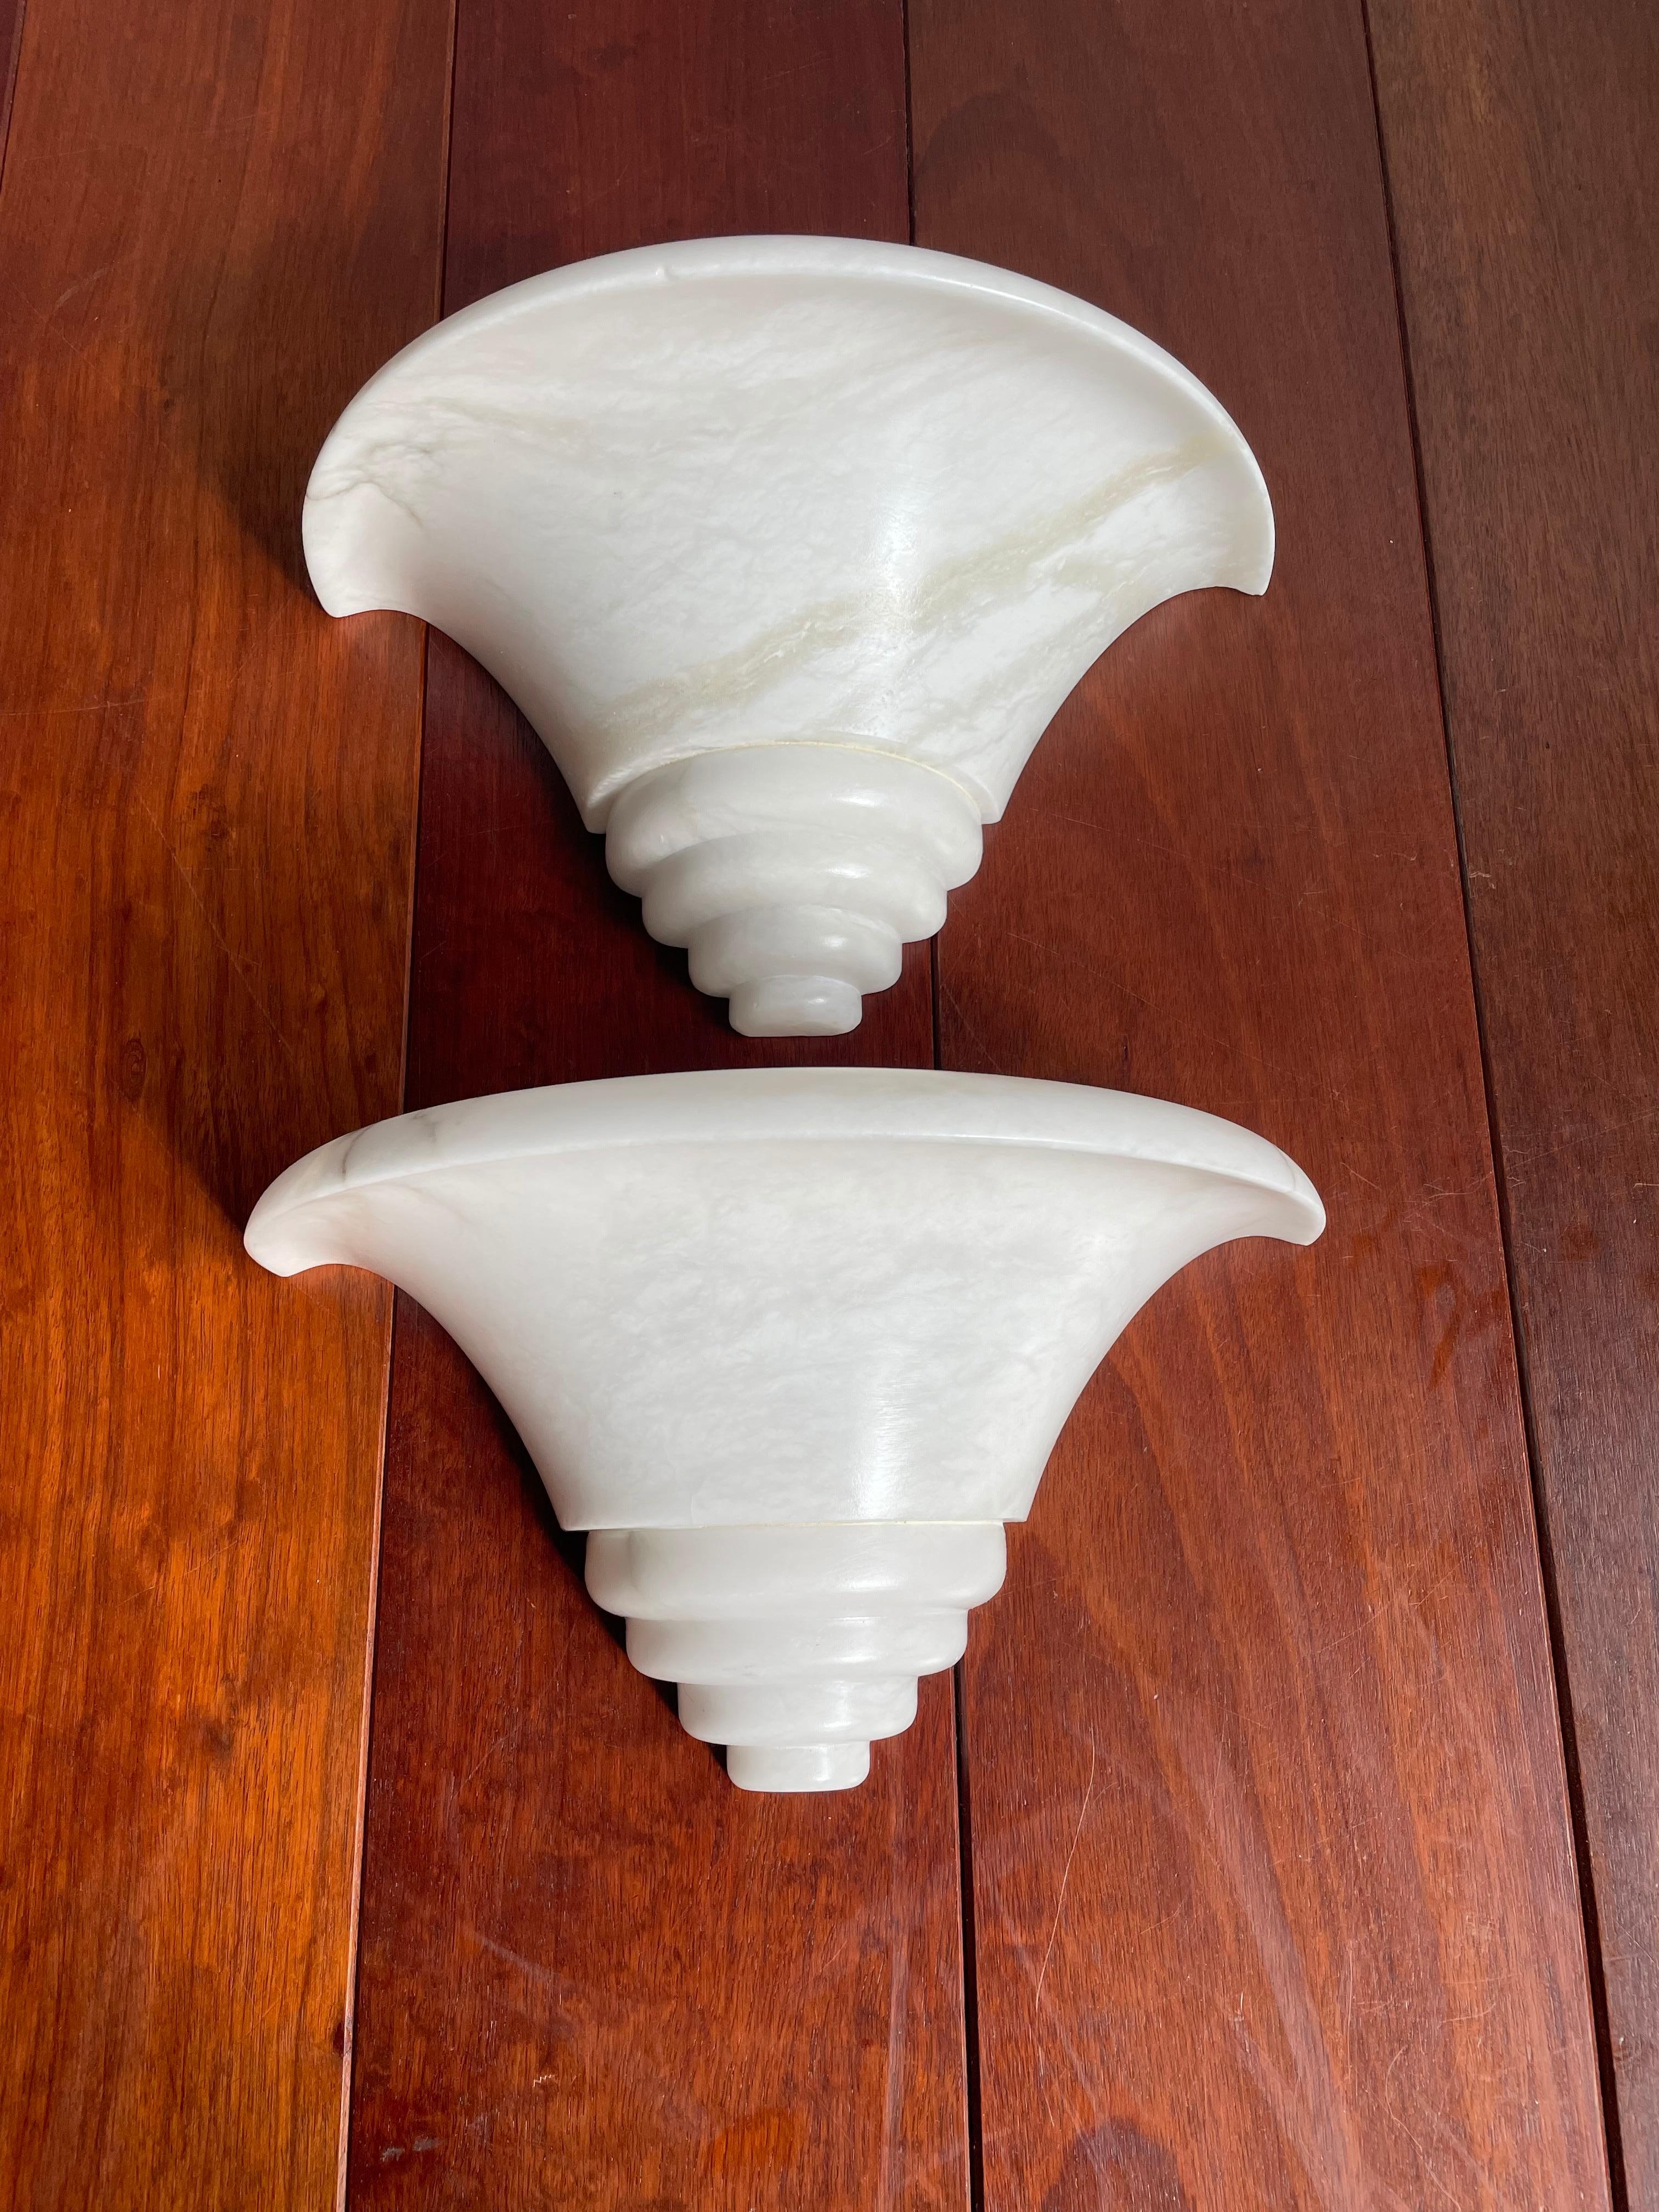 20th Century Exceptional Shape Midcentury Era Pair of Alabaster Wall Sconces Lamps / Lights For Sale